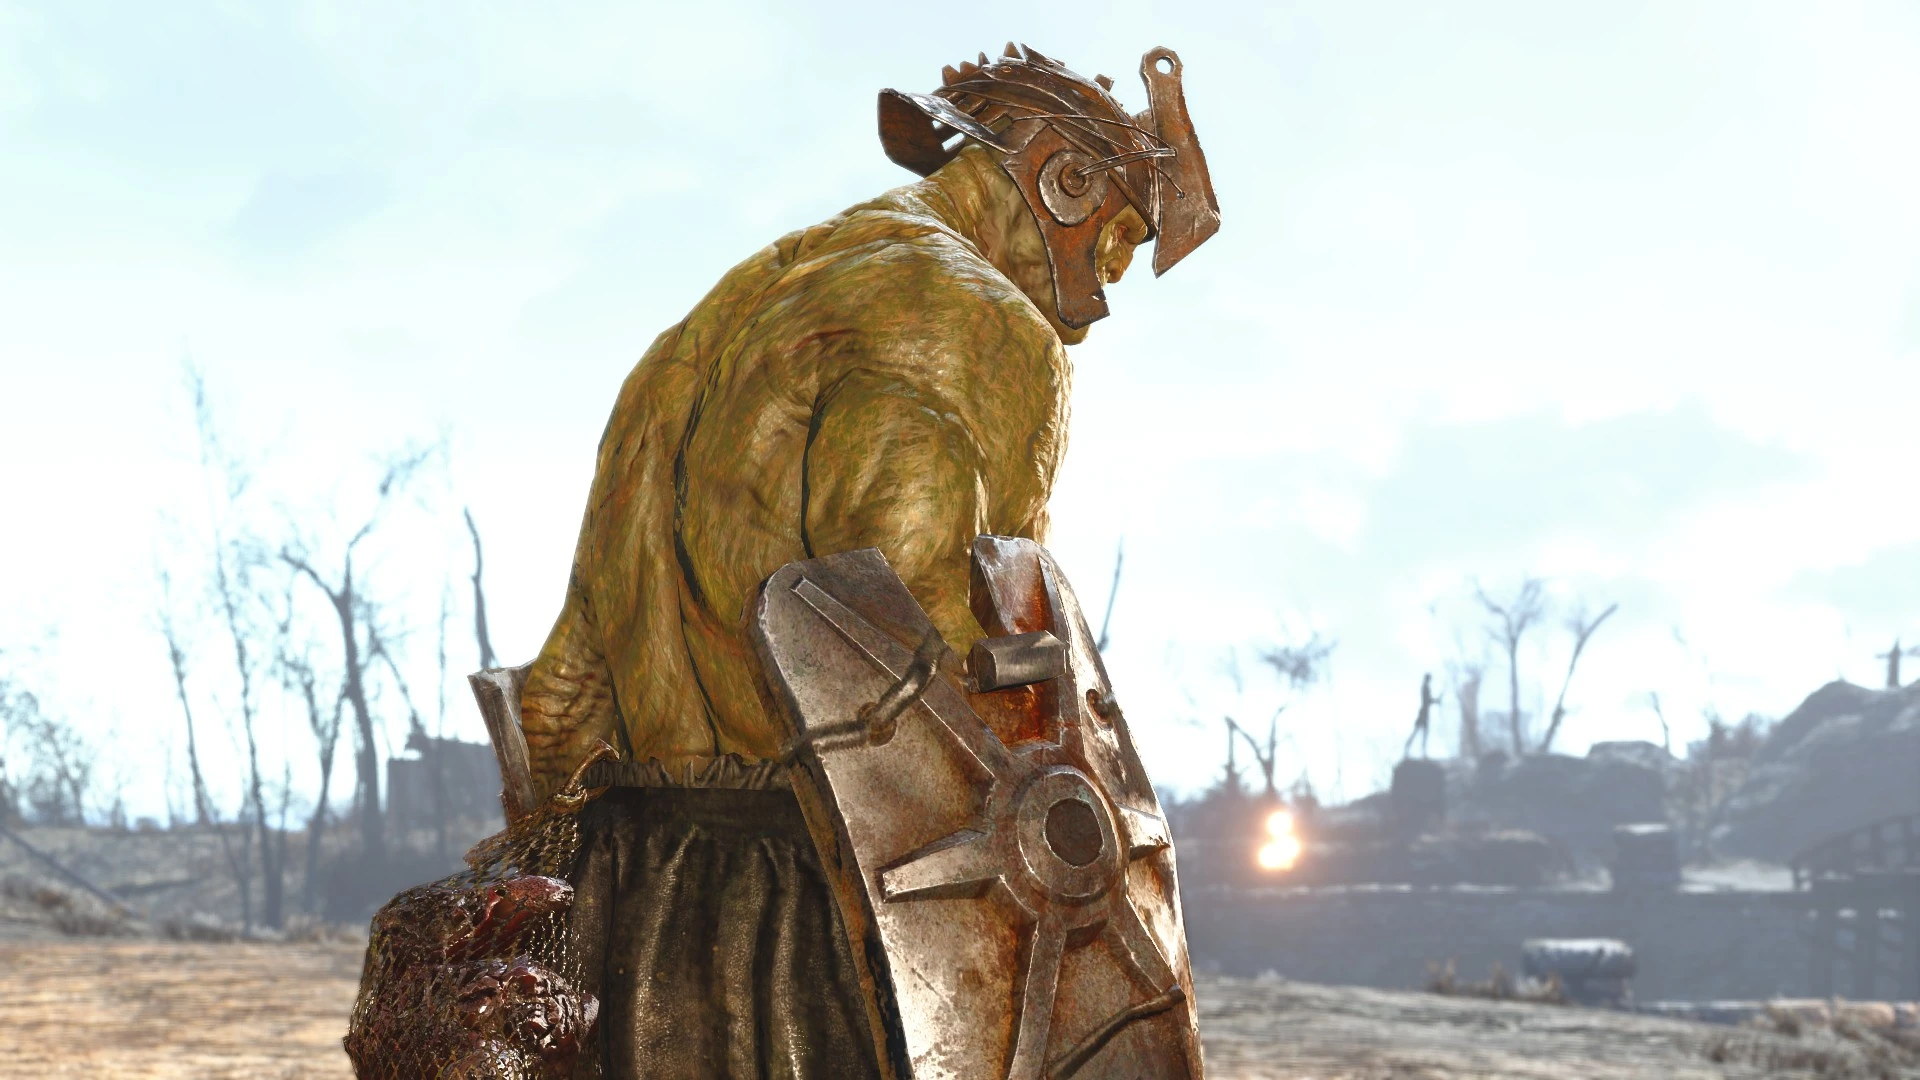 Super Mutant Redux at Fallout 4 Nexus - Mods and community